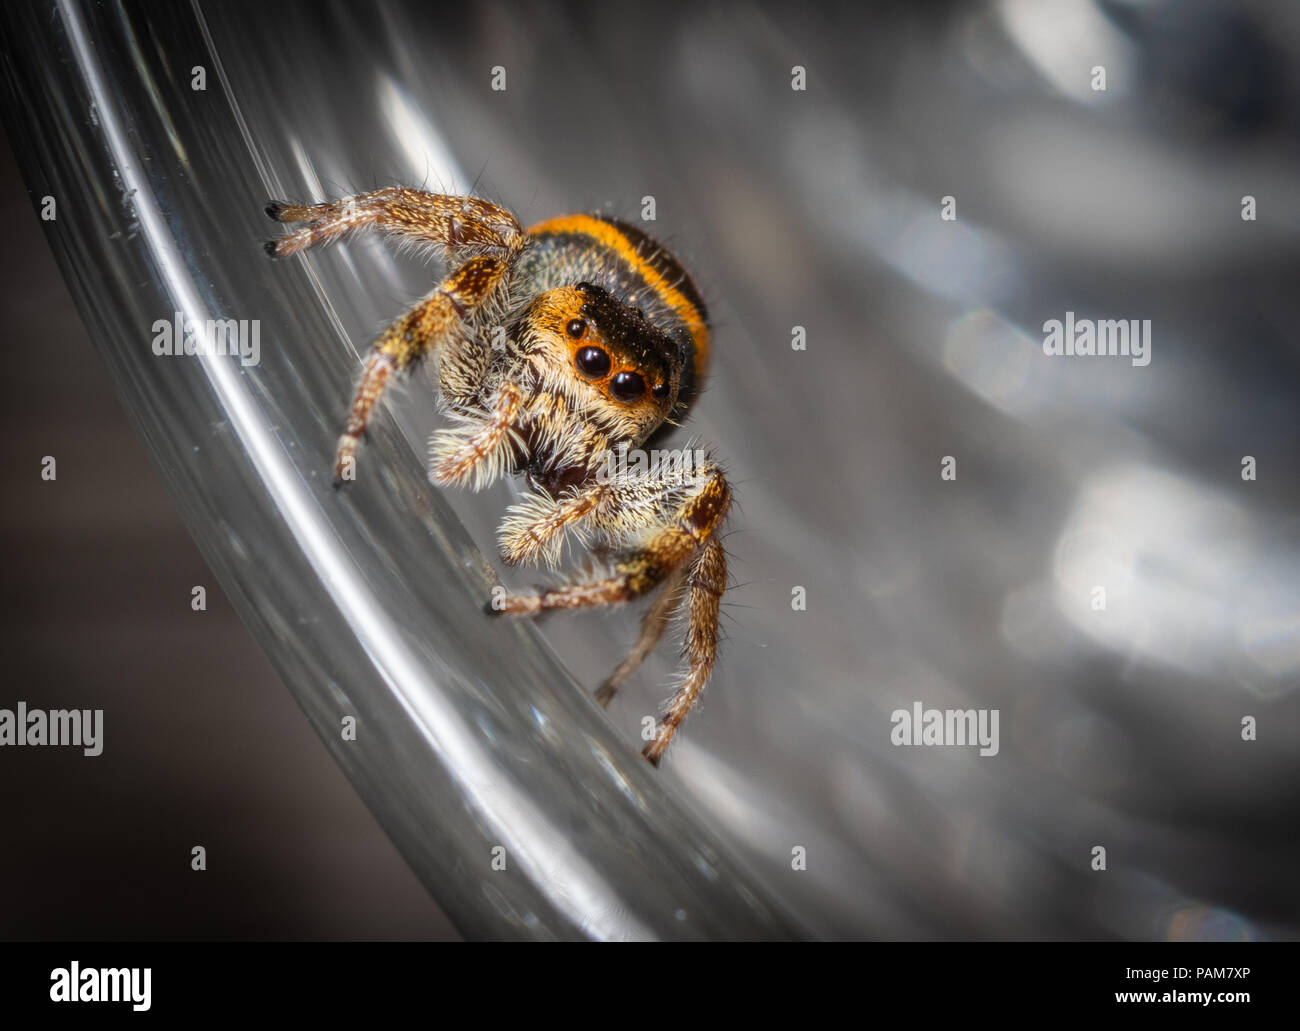 A jumping spider walks along the rim of a glass. Stock Photo